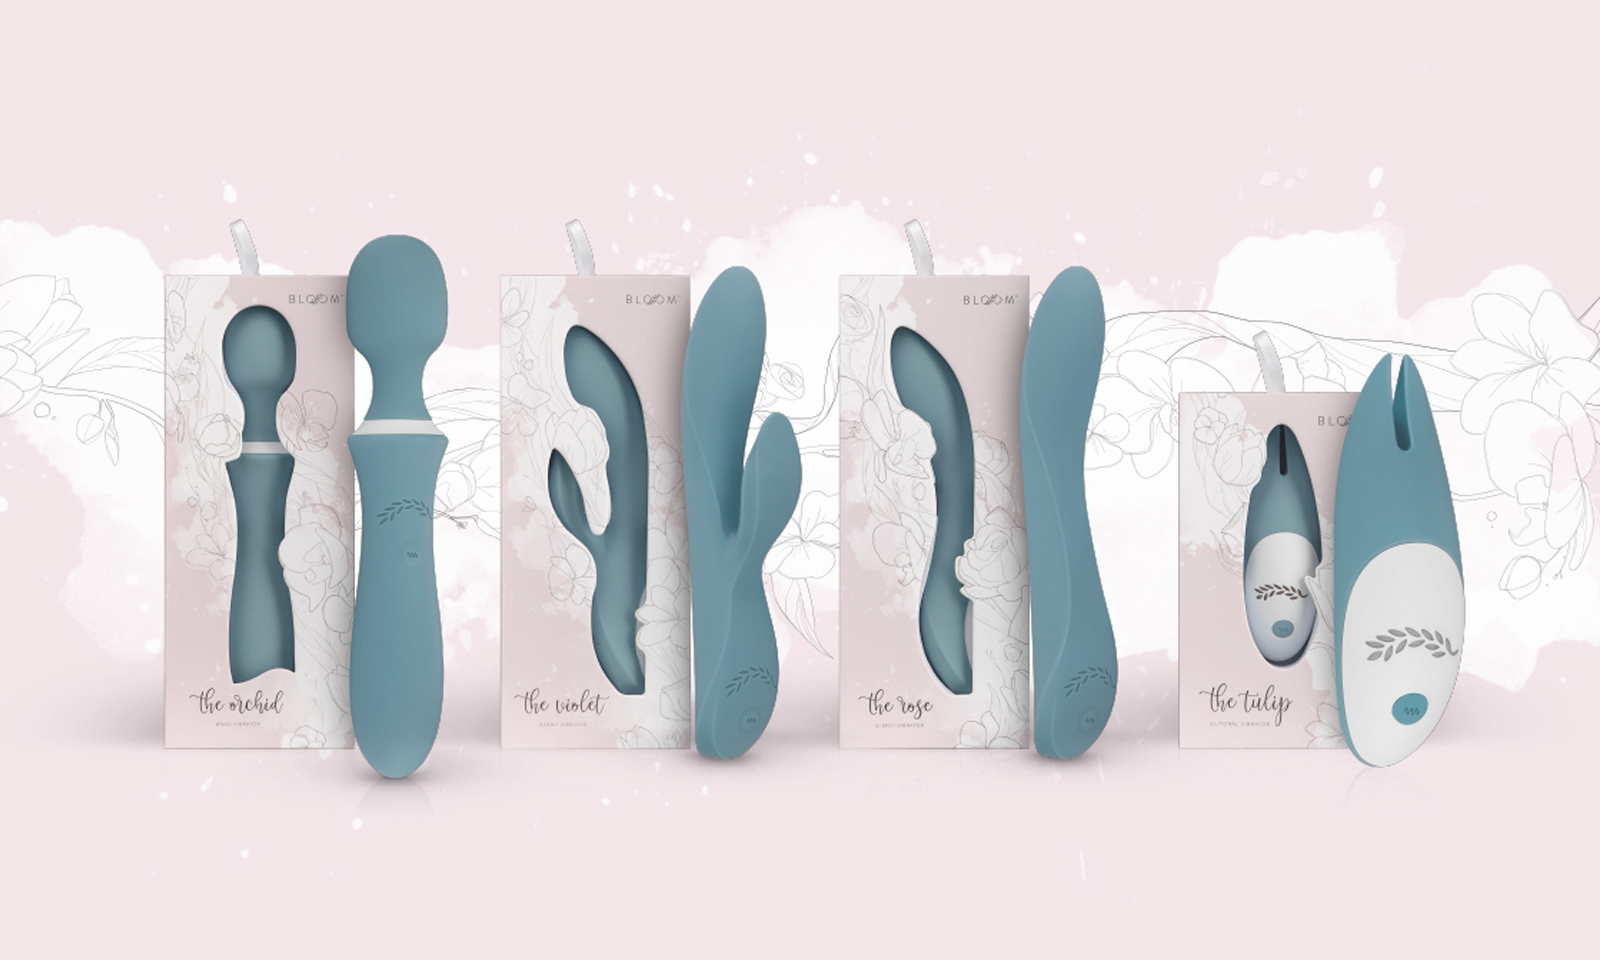 EDC Wholesale Launches Bloom Vibrator Collection